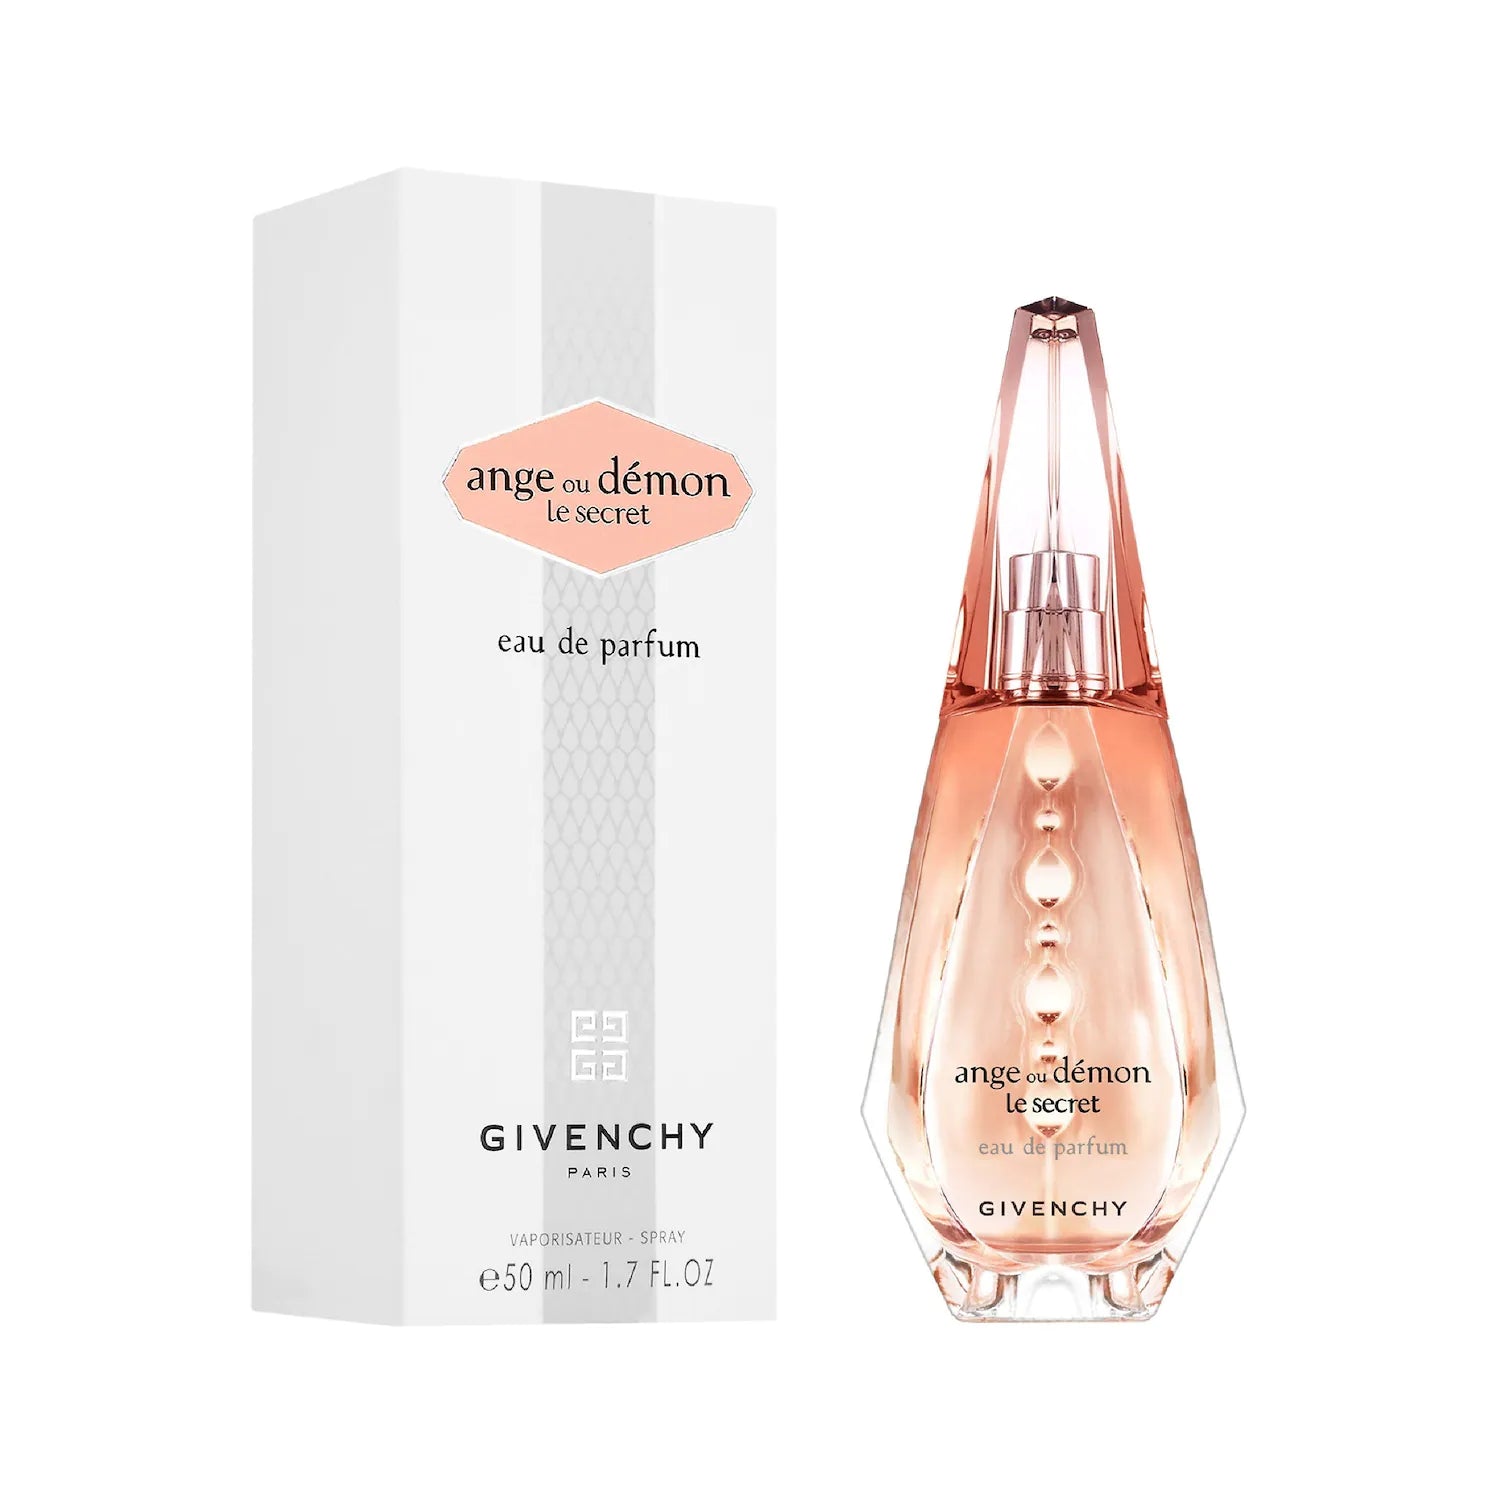 <span data-mce-fragment="1">Givenchy's Ange ou Démon le Secret Eau de Parfum is a fruity, sensual fragrance with a mysterious duality. A burst of cranberry and lemon is underpinned by the refreshing aroma of green tea leaf. A luminous base of blond wood reveals a captivating accord, revealing a perfume as delicate as dawn.</span>